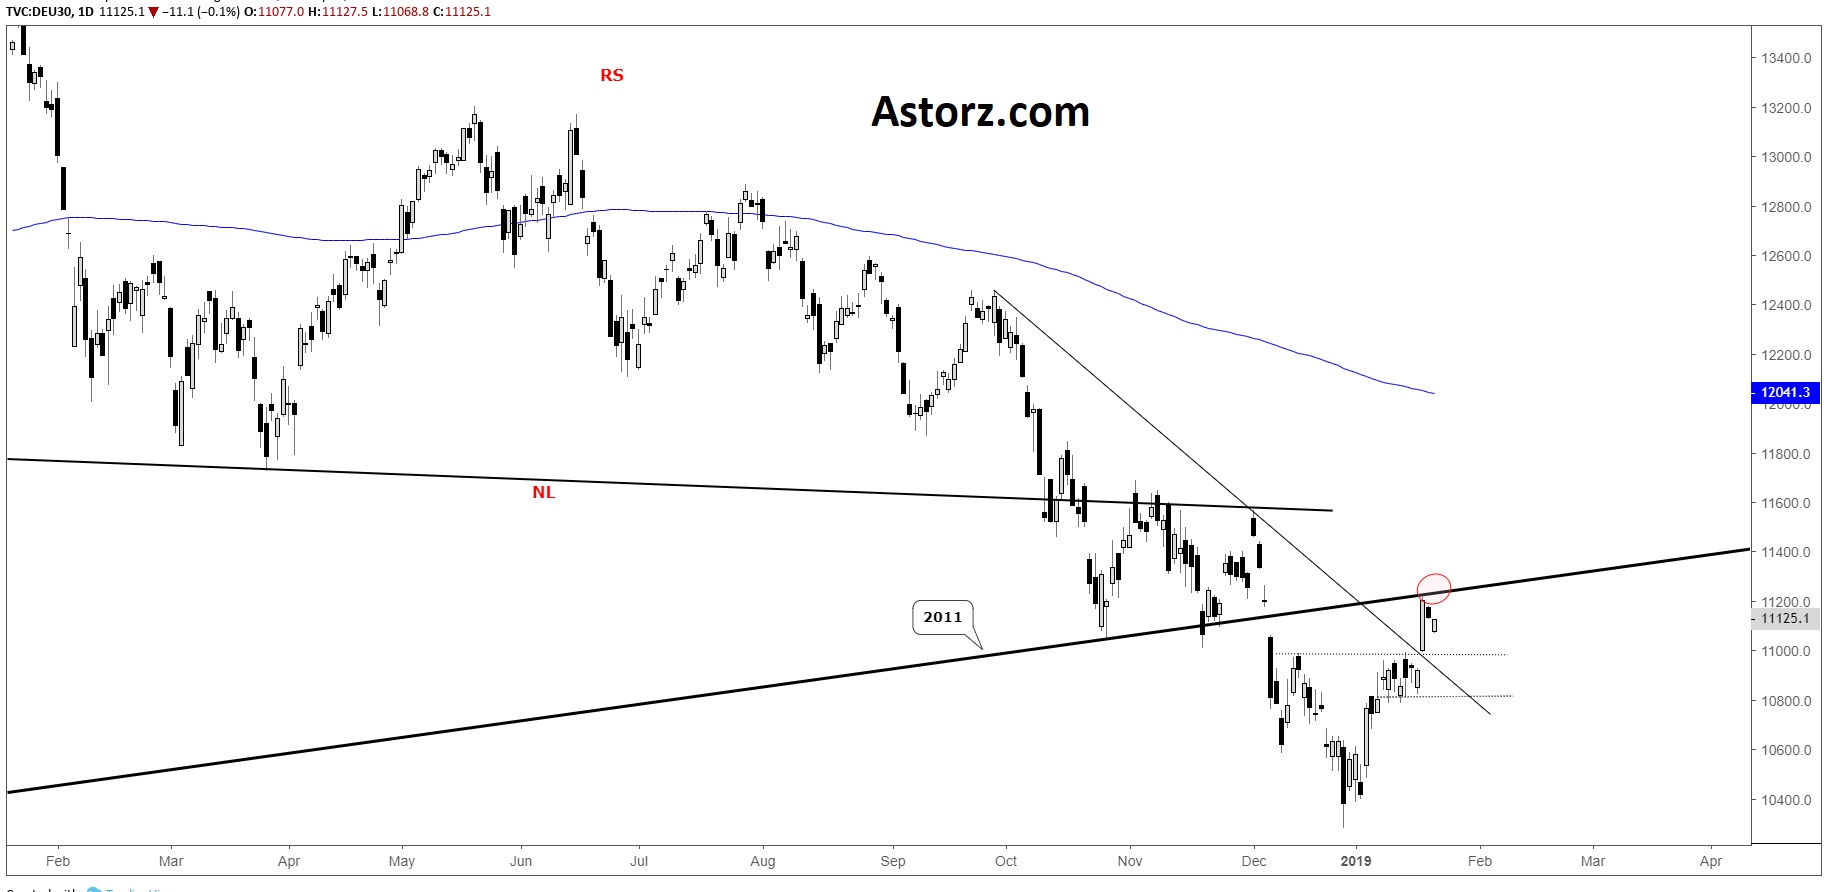 Astorz Trading Analyse technique DAX30 CAC40 du 22/01/2019